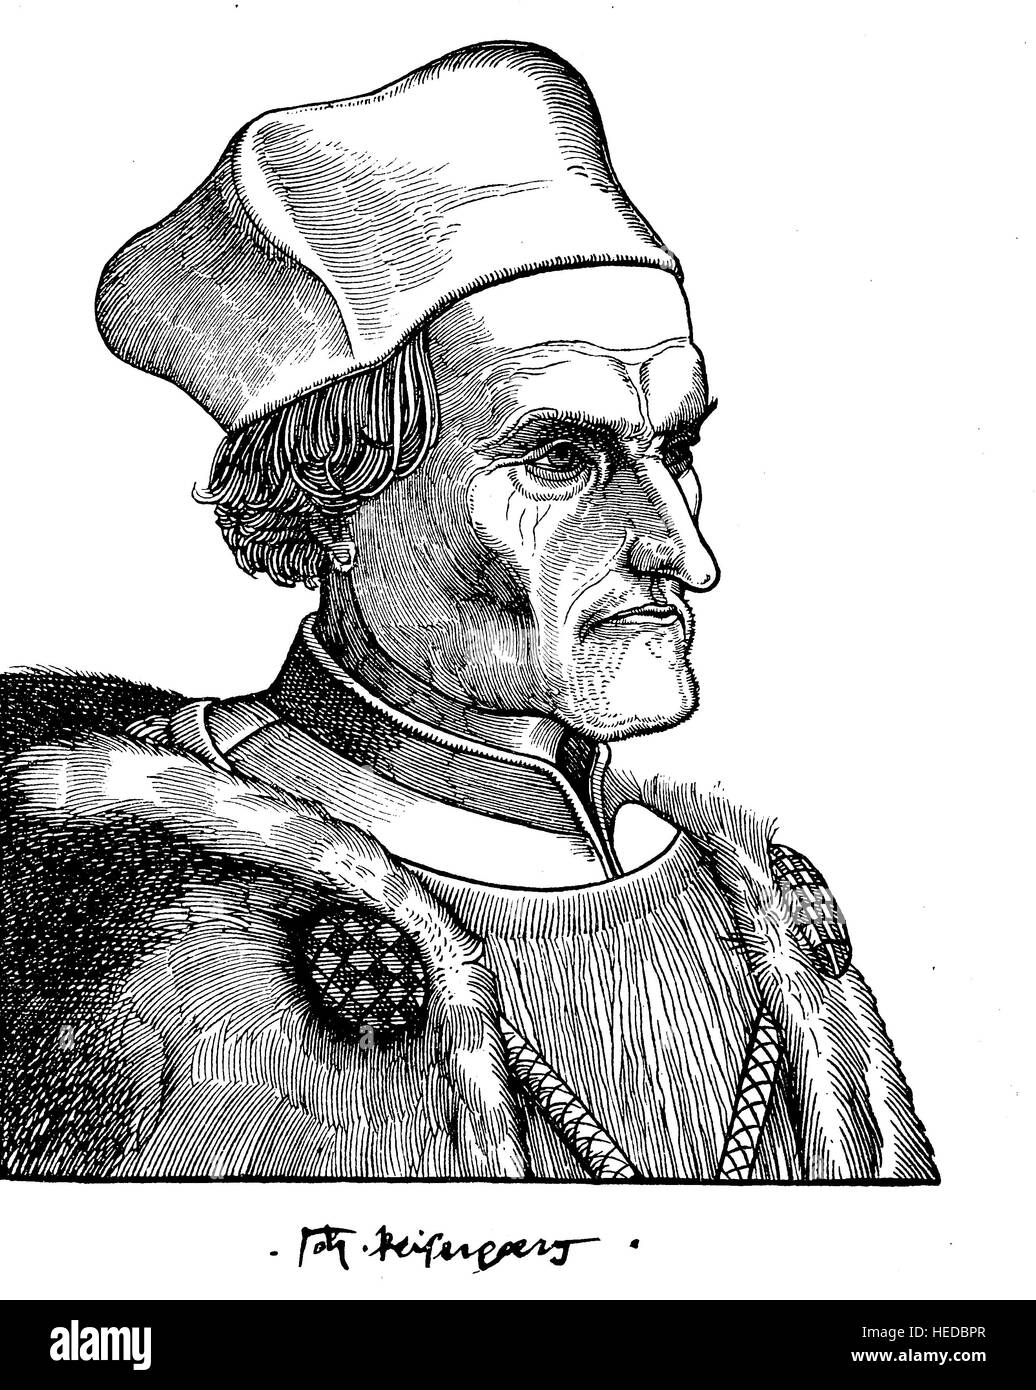 Johann Geiler von Kaysersberg or Kaisersberg, 1445-1510, a Swiss-born priest, one of the greatest of the popular preachers of the 15th century, from a woodcut of 1880, digital improved Stock Photo